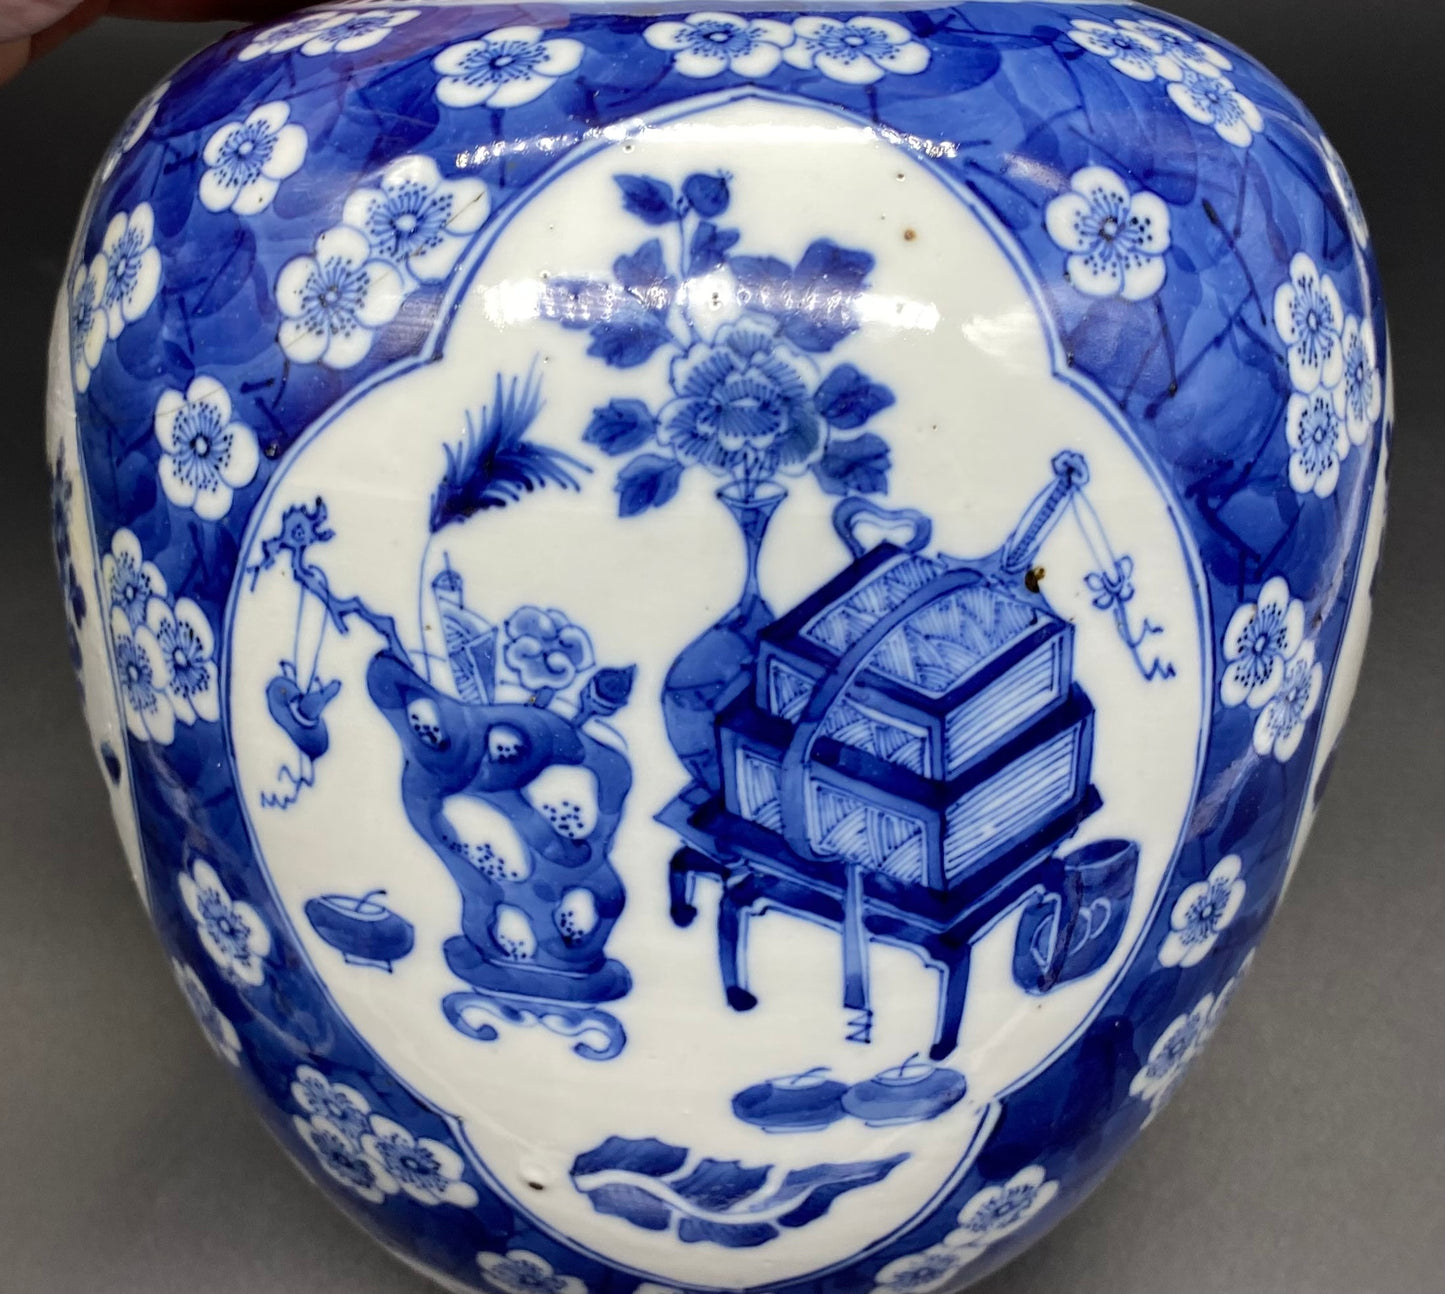 Buy Antiques Online - The beautiful blue color and prunus decoration make it a valuable addition to any collection. 